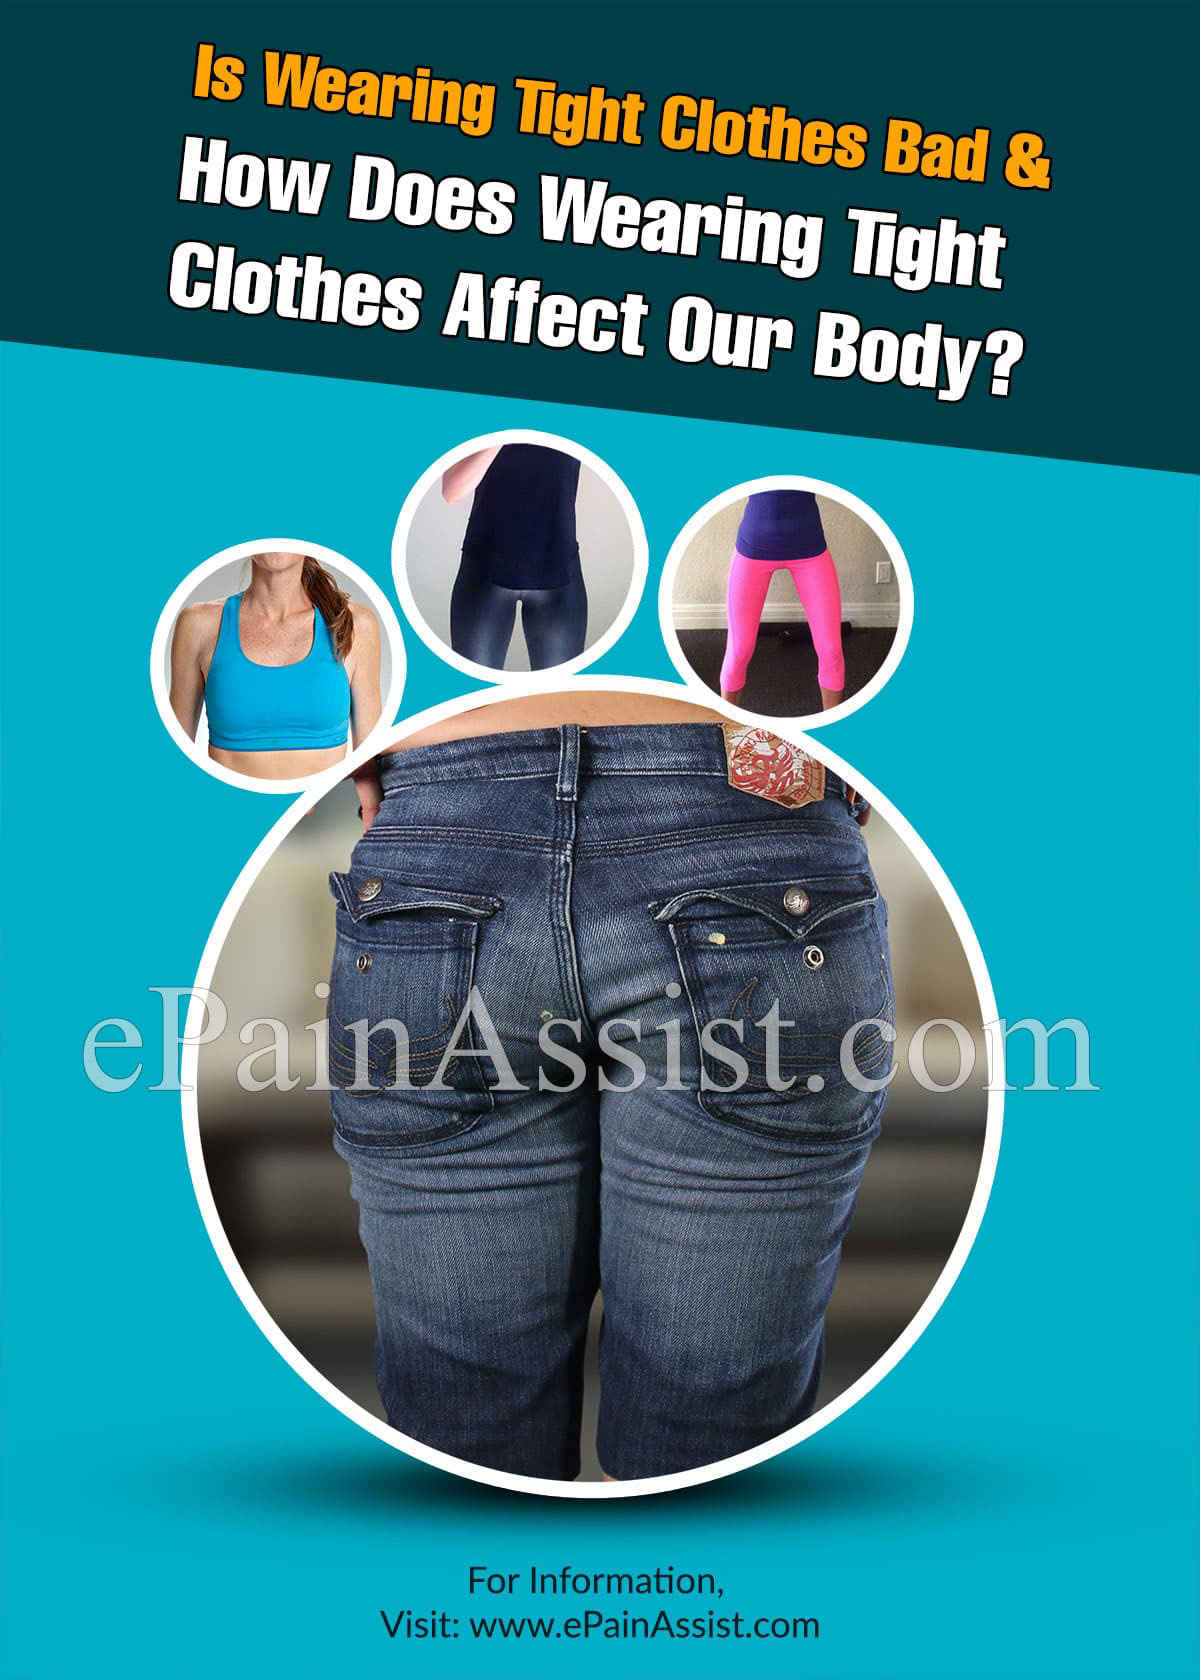 https://www.epainassist.com/assets/articles/2019/how-does-wearing-tight-clothes-affect-our-body.jpg